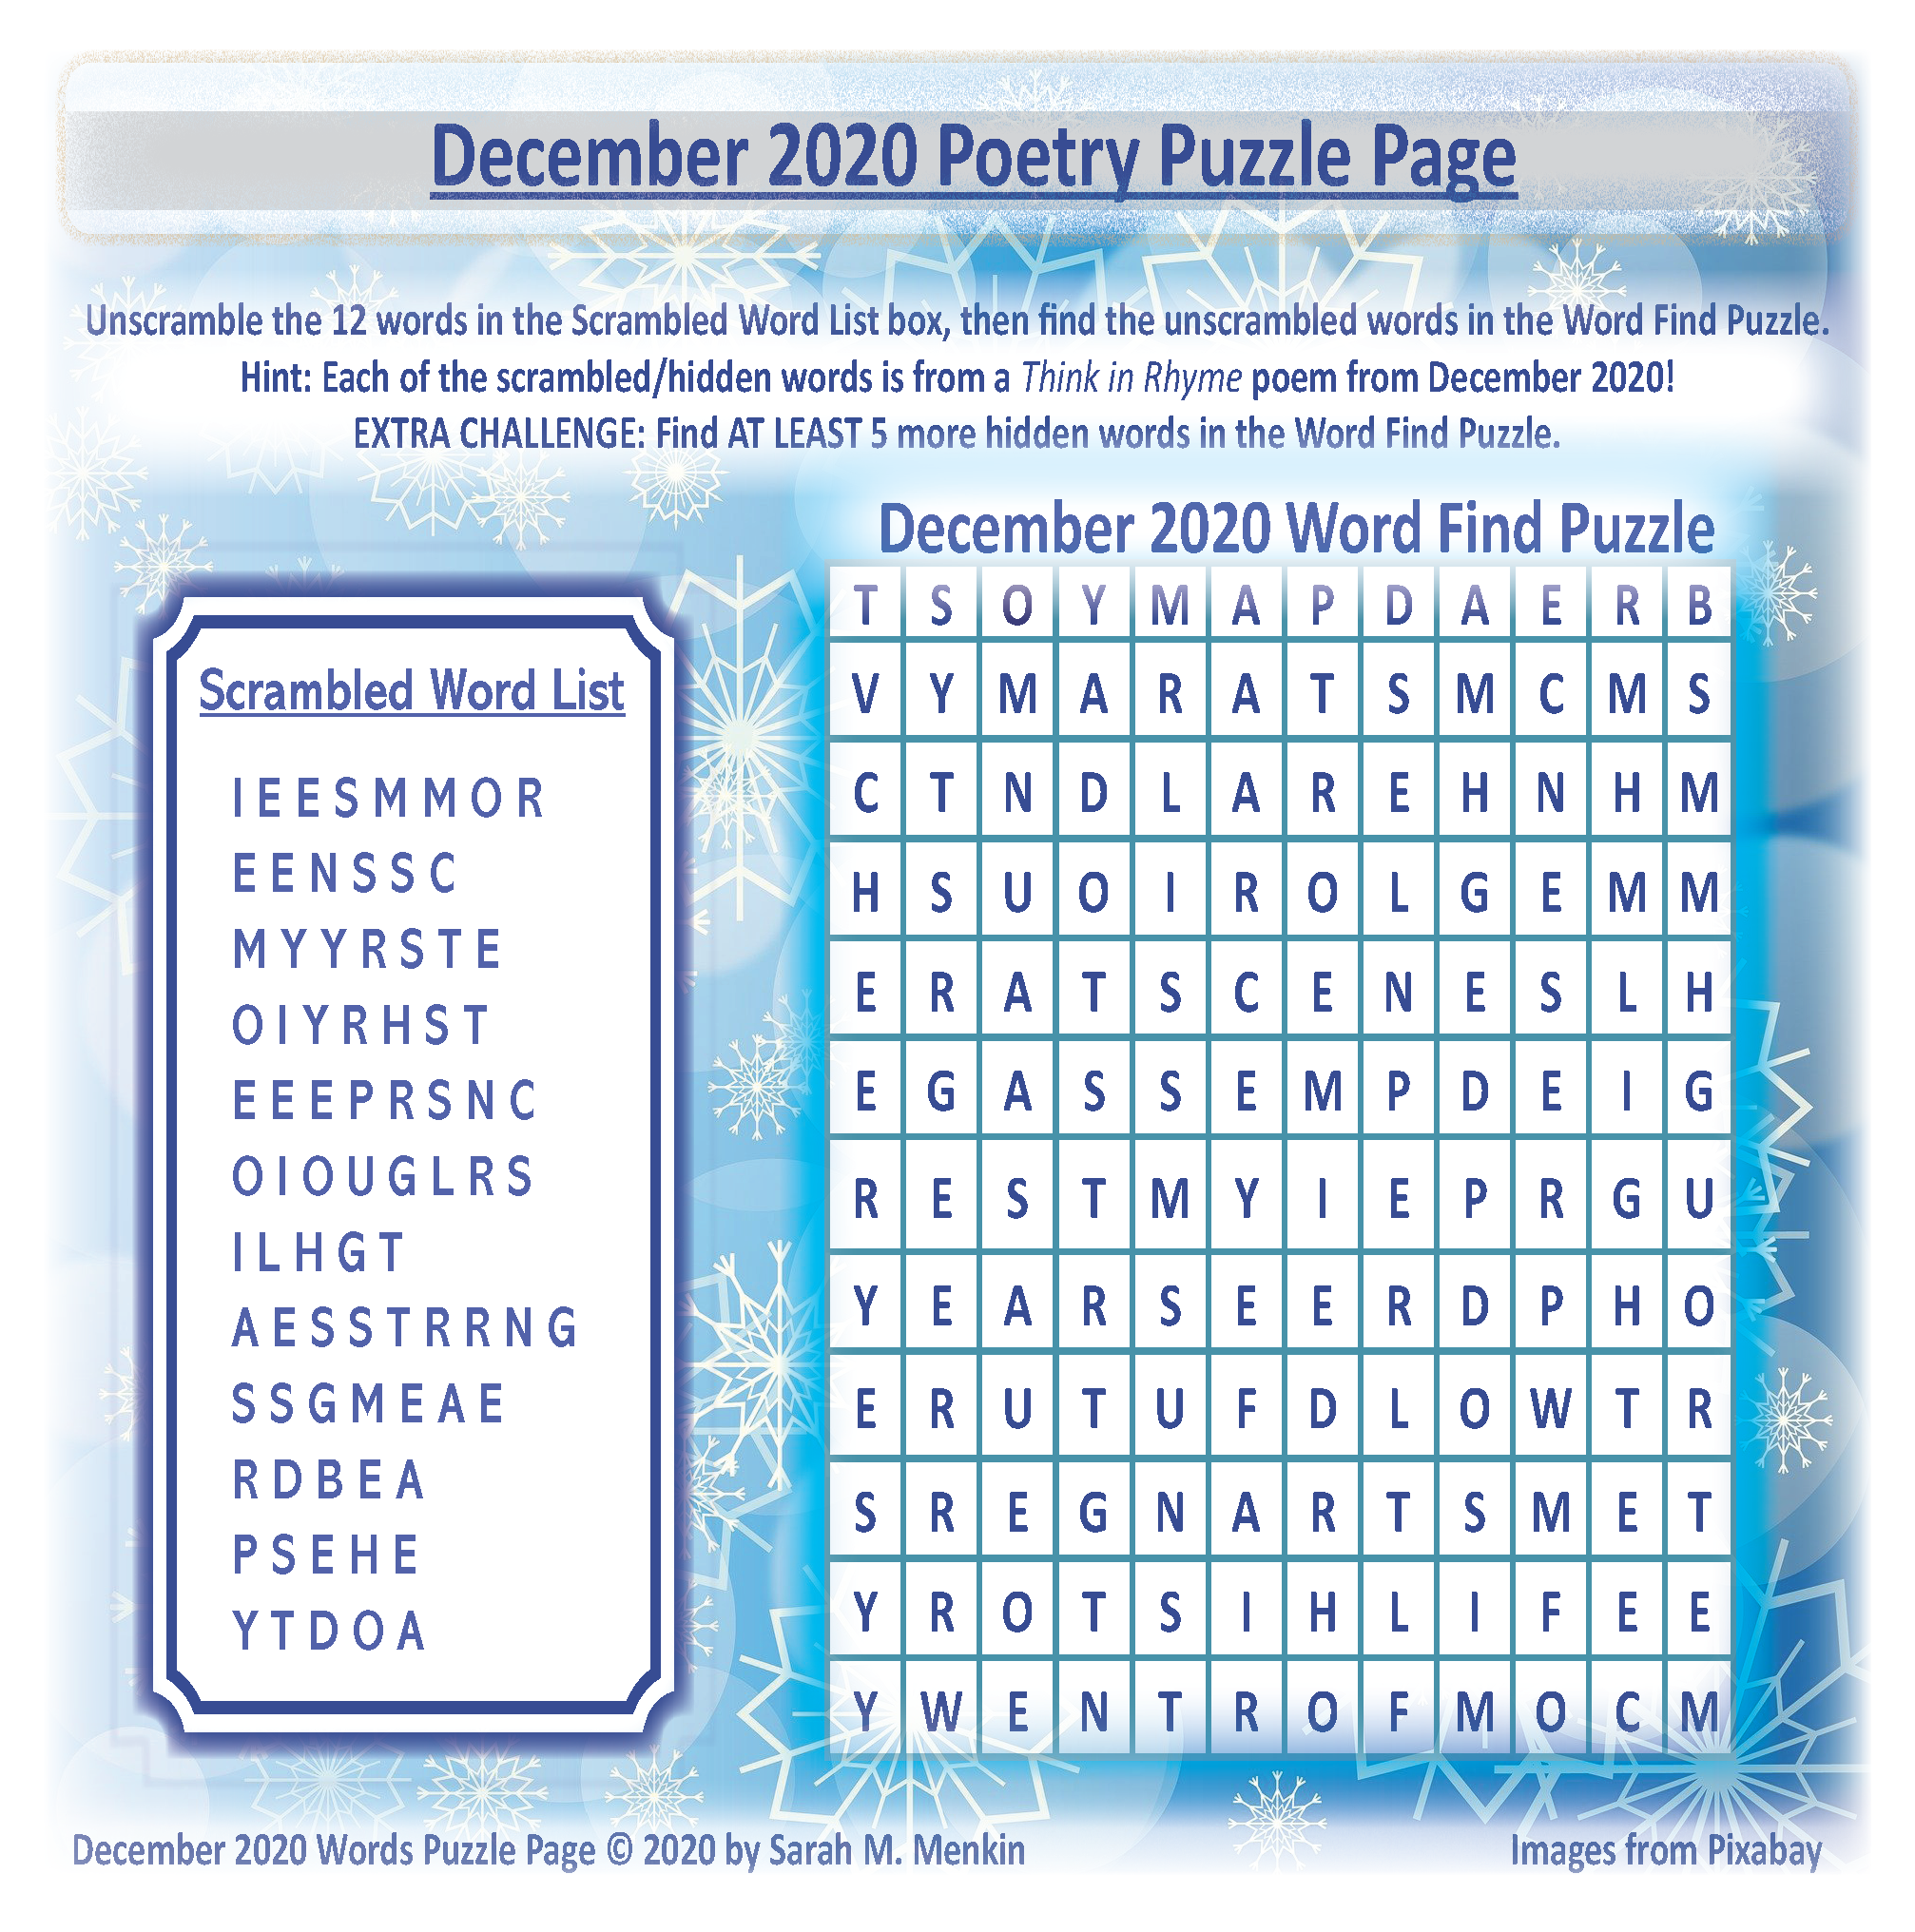 December 2020 Poetry Puzle Page